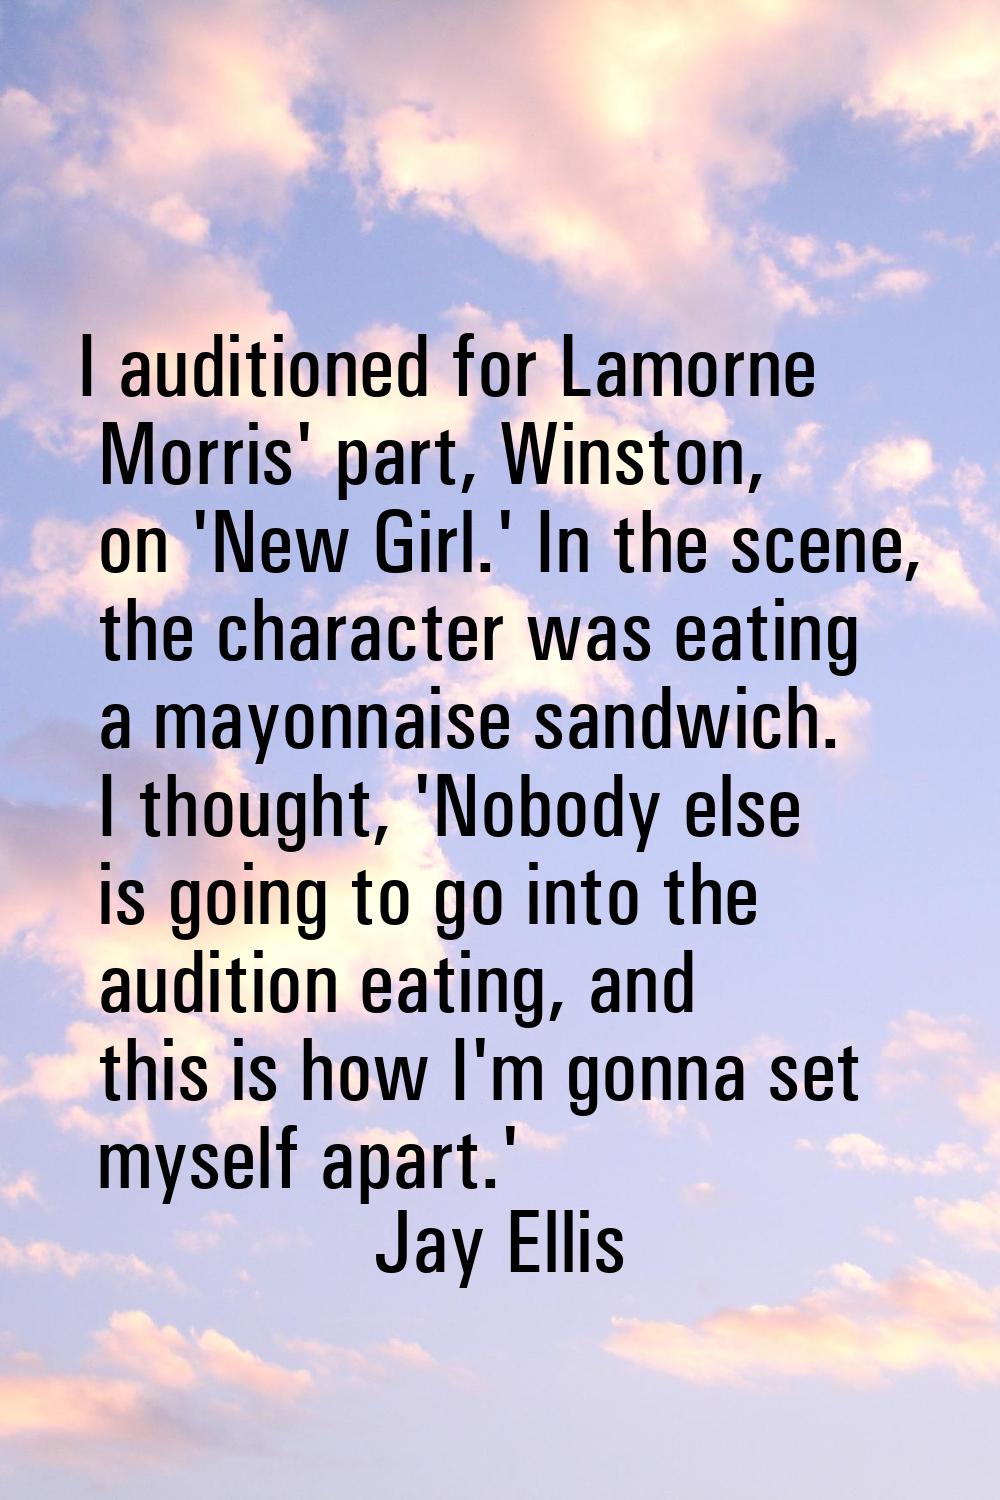 I auditioned for Lamorne Morris' part, Winston, on 'New Girl.' In the scene, the character was eati